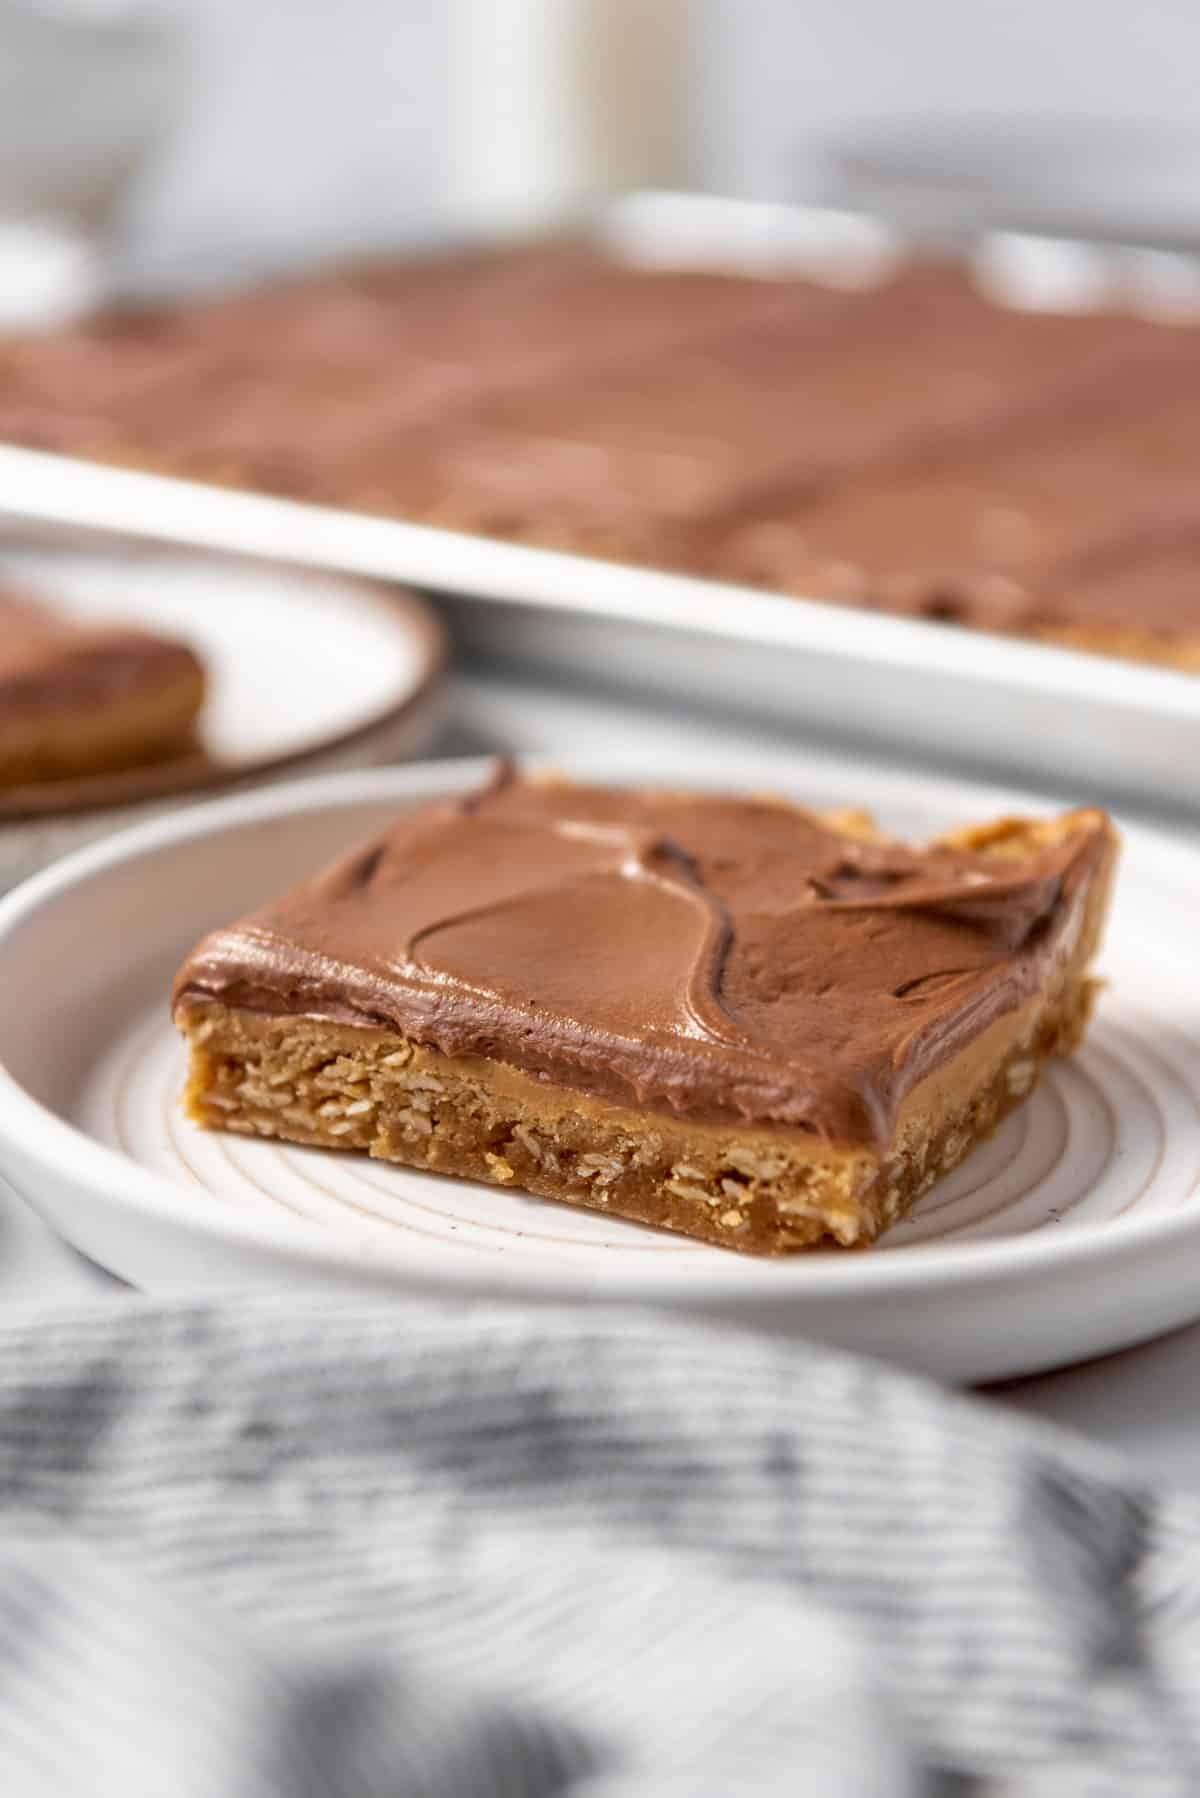 A lunch lady peanut butter bar with chocolate frosting on a white plate in front of more bars on a baking sheet behind it.